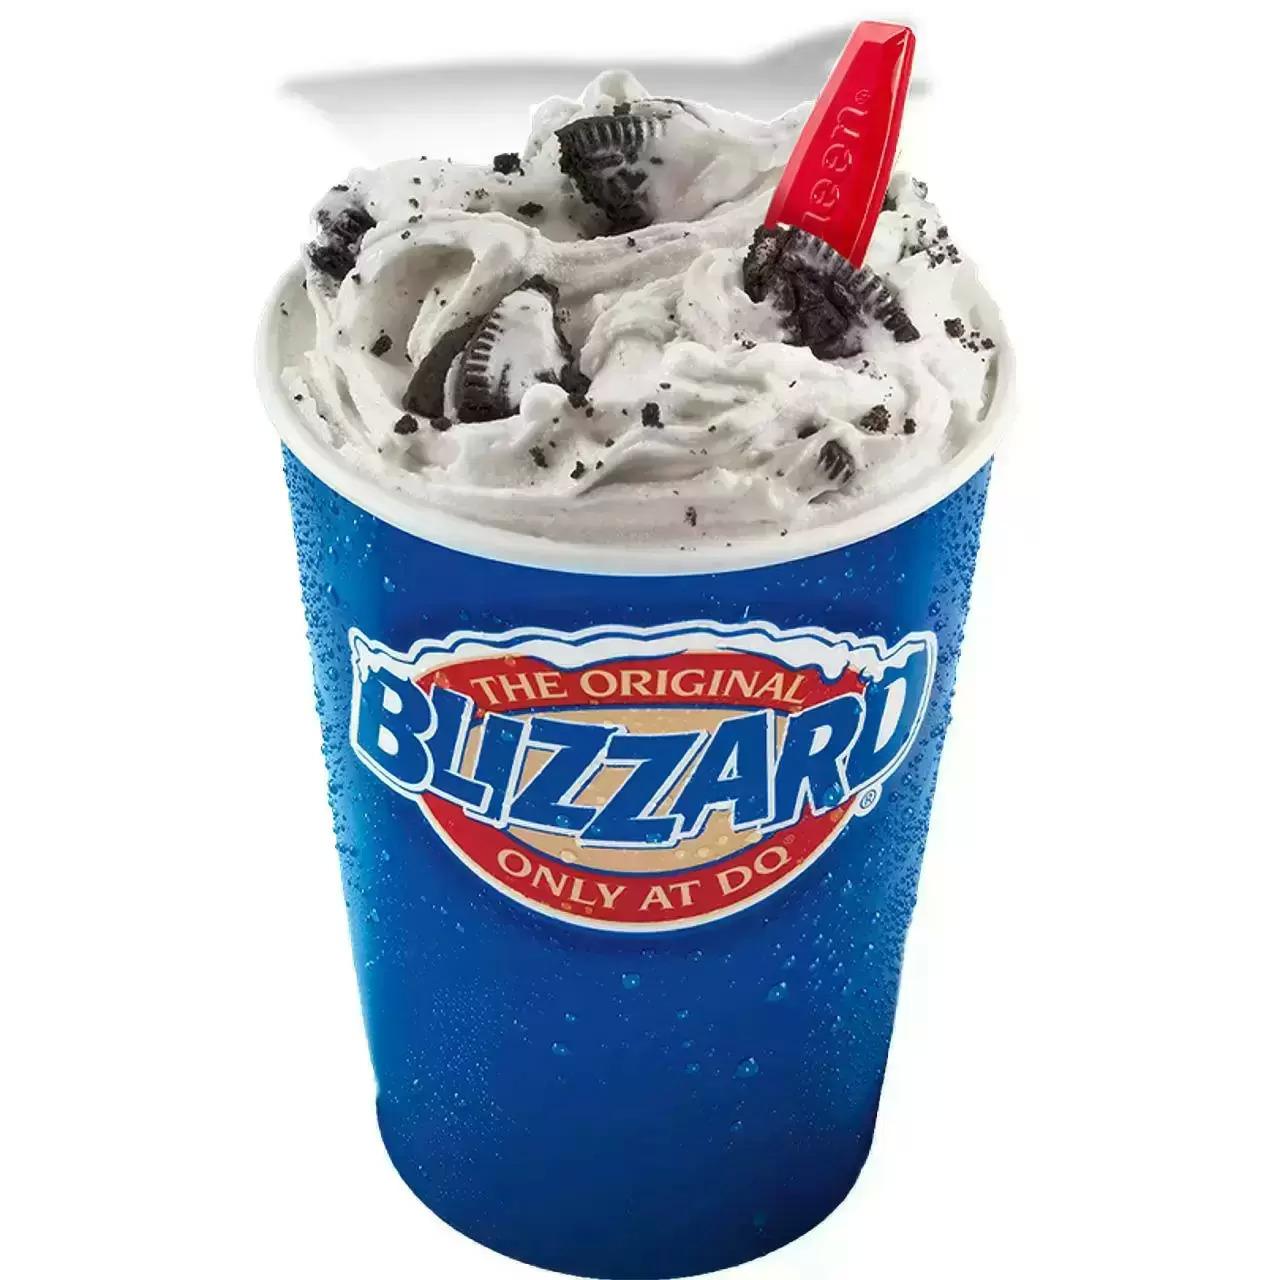 Dairy Queen Blizzard Treat Buy One Get One Free